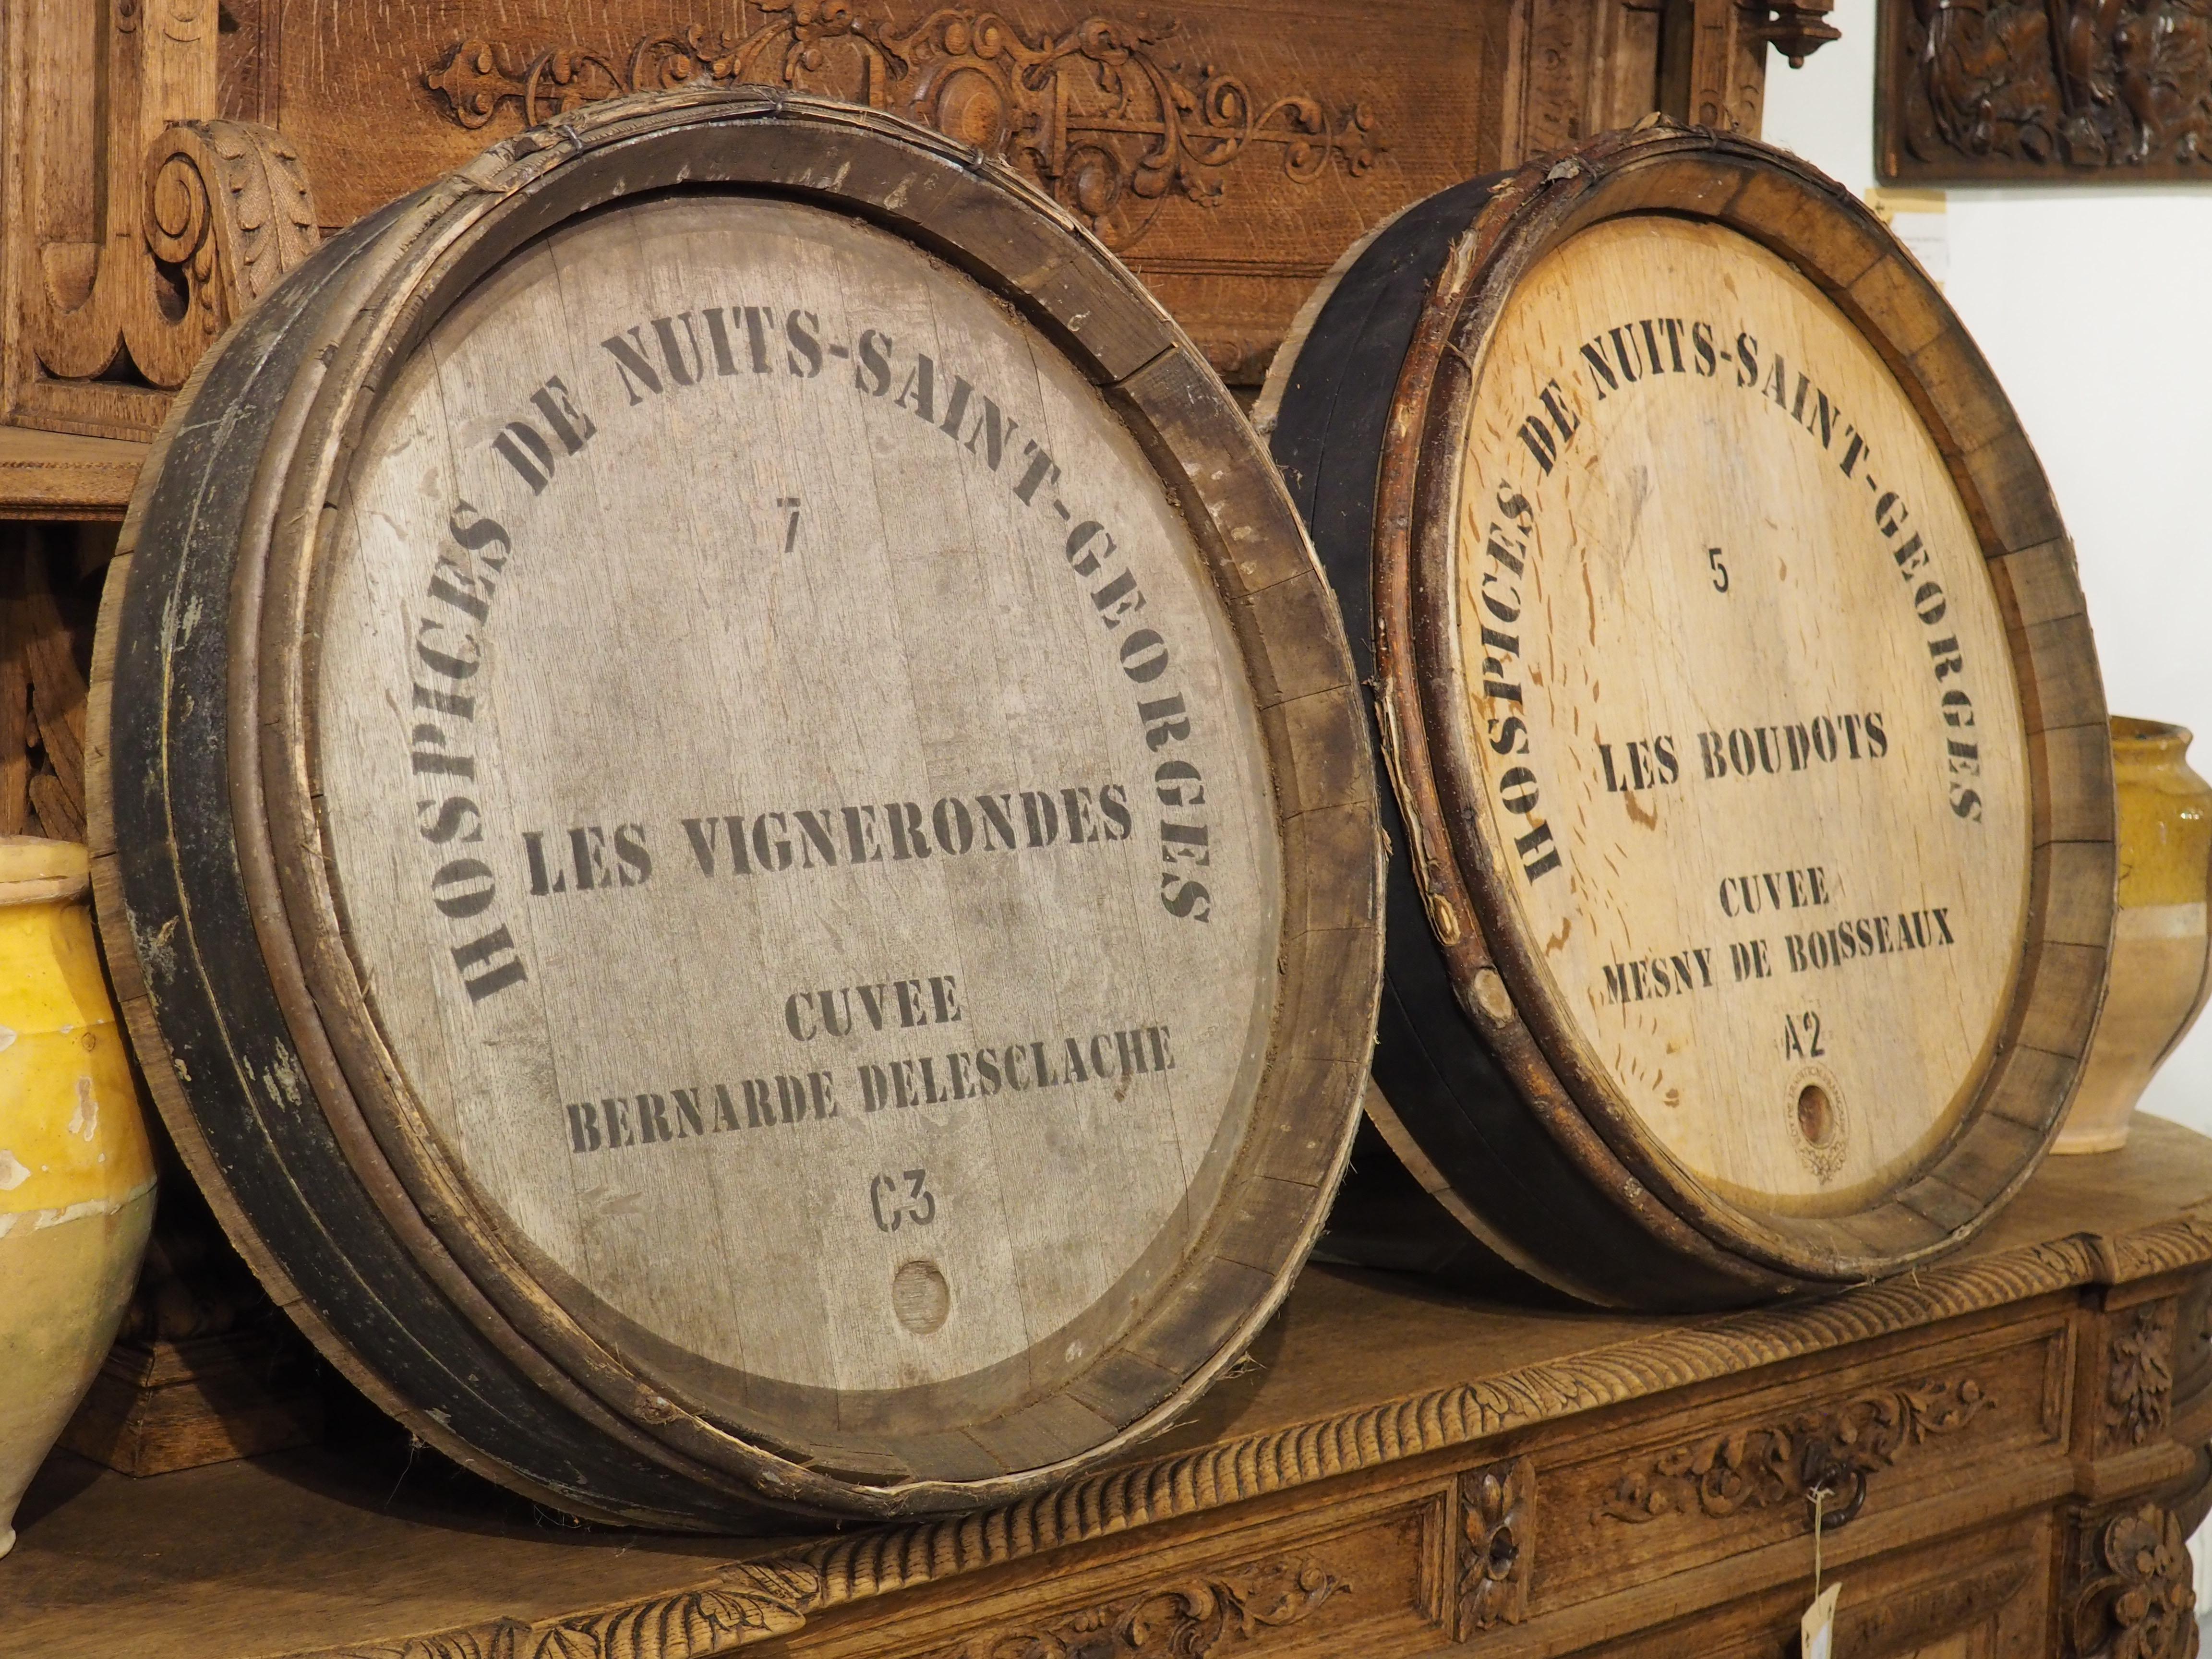 Pair of French Wine Barrel Facades, “Hospices de Nuits-Saint-Georges”, 1900s In Good Condition For Sale In Dallas, TX